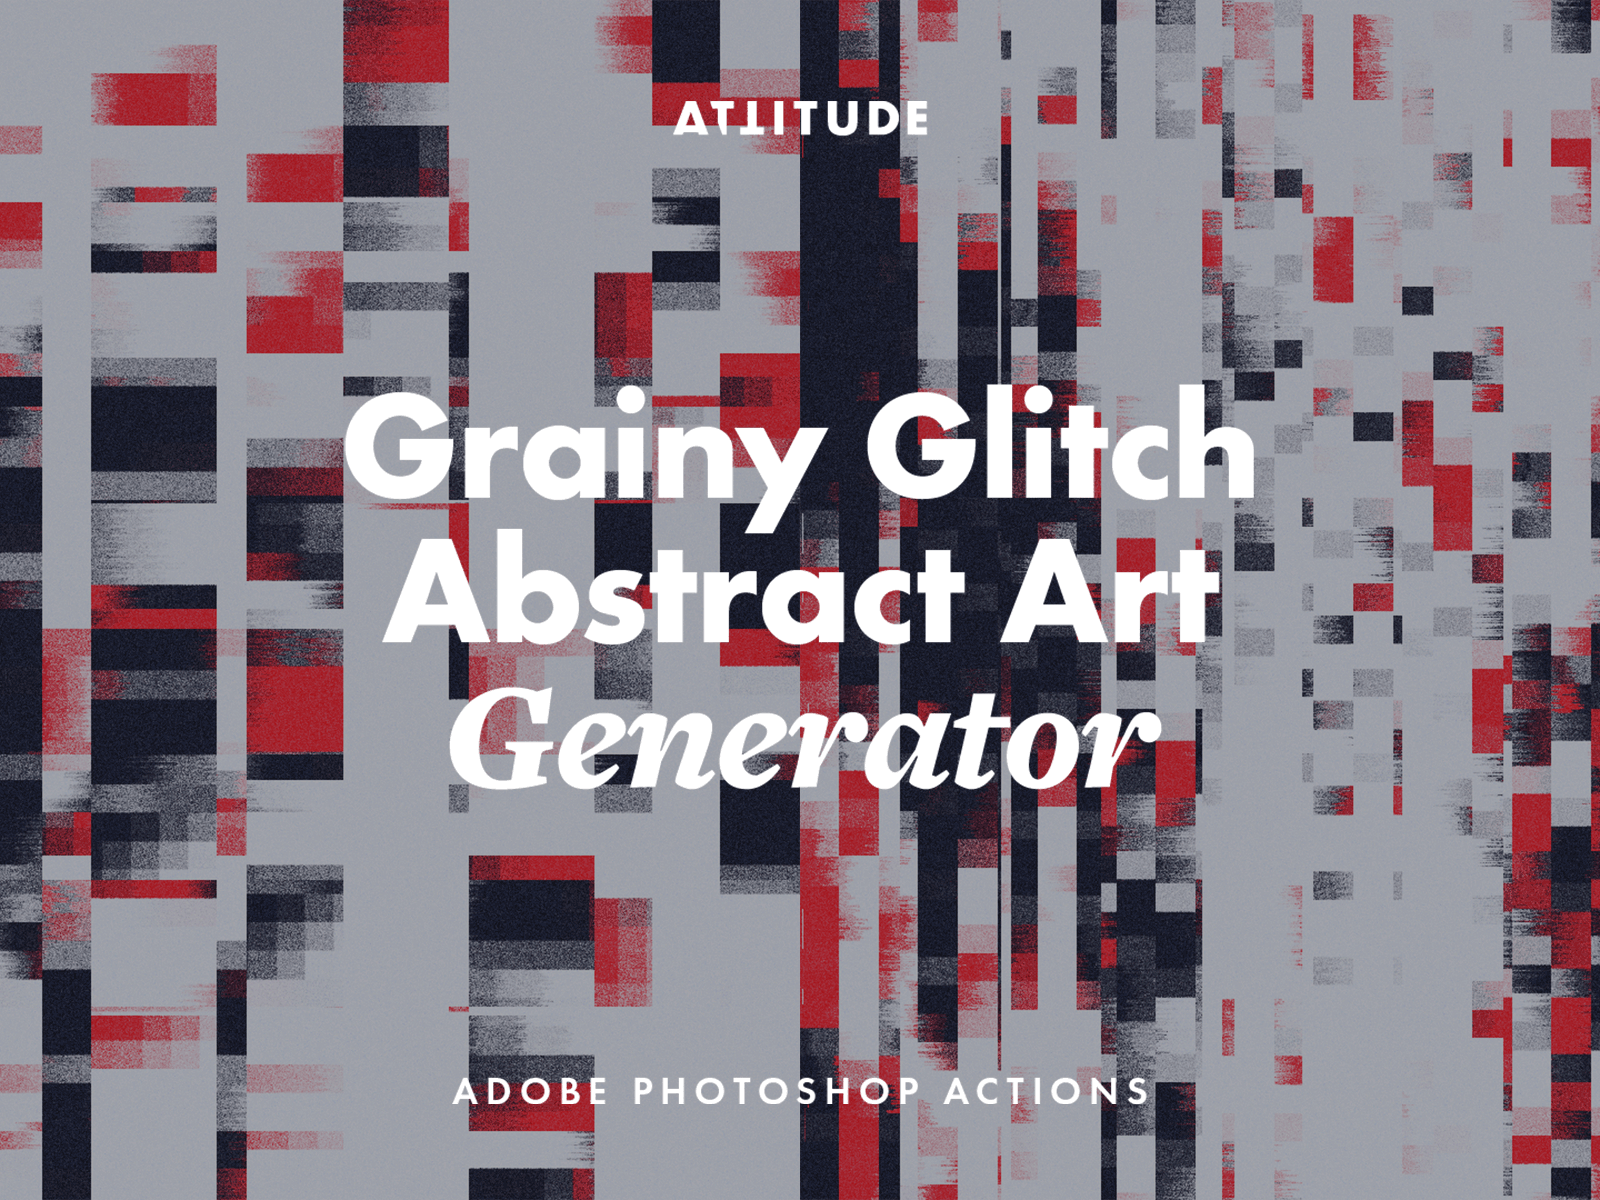 Grainy Glitch Abstract Art Generator abstract adobe photoshop distortions glitch graphic design photoshop actions photoshop effects retro